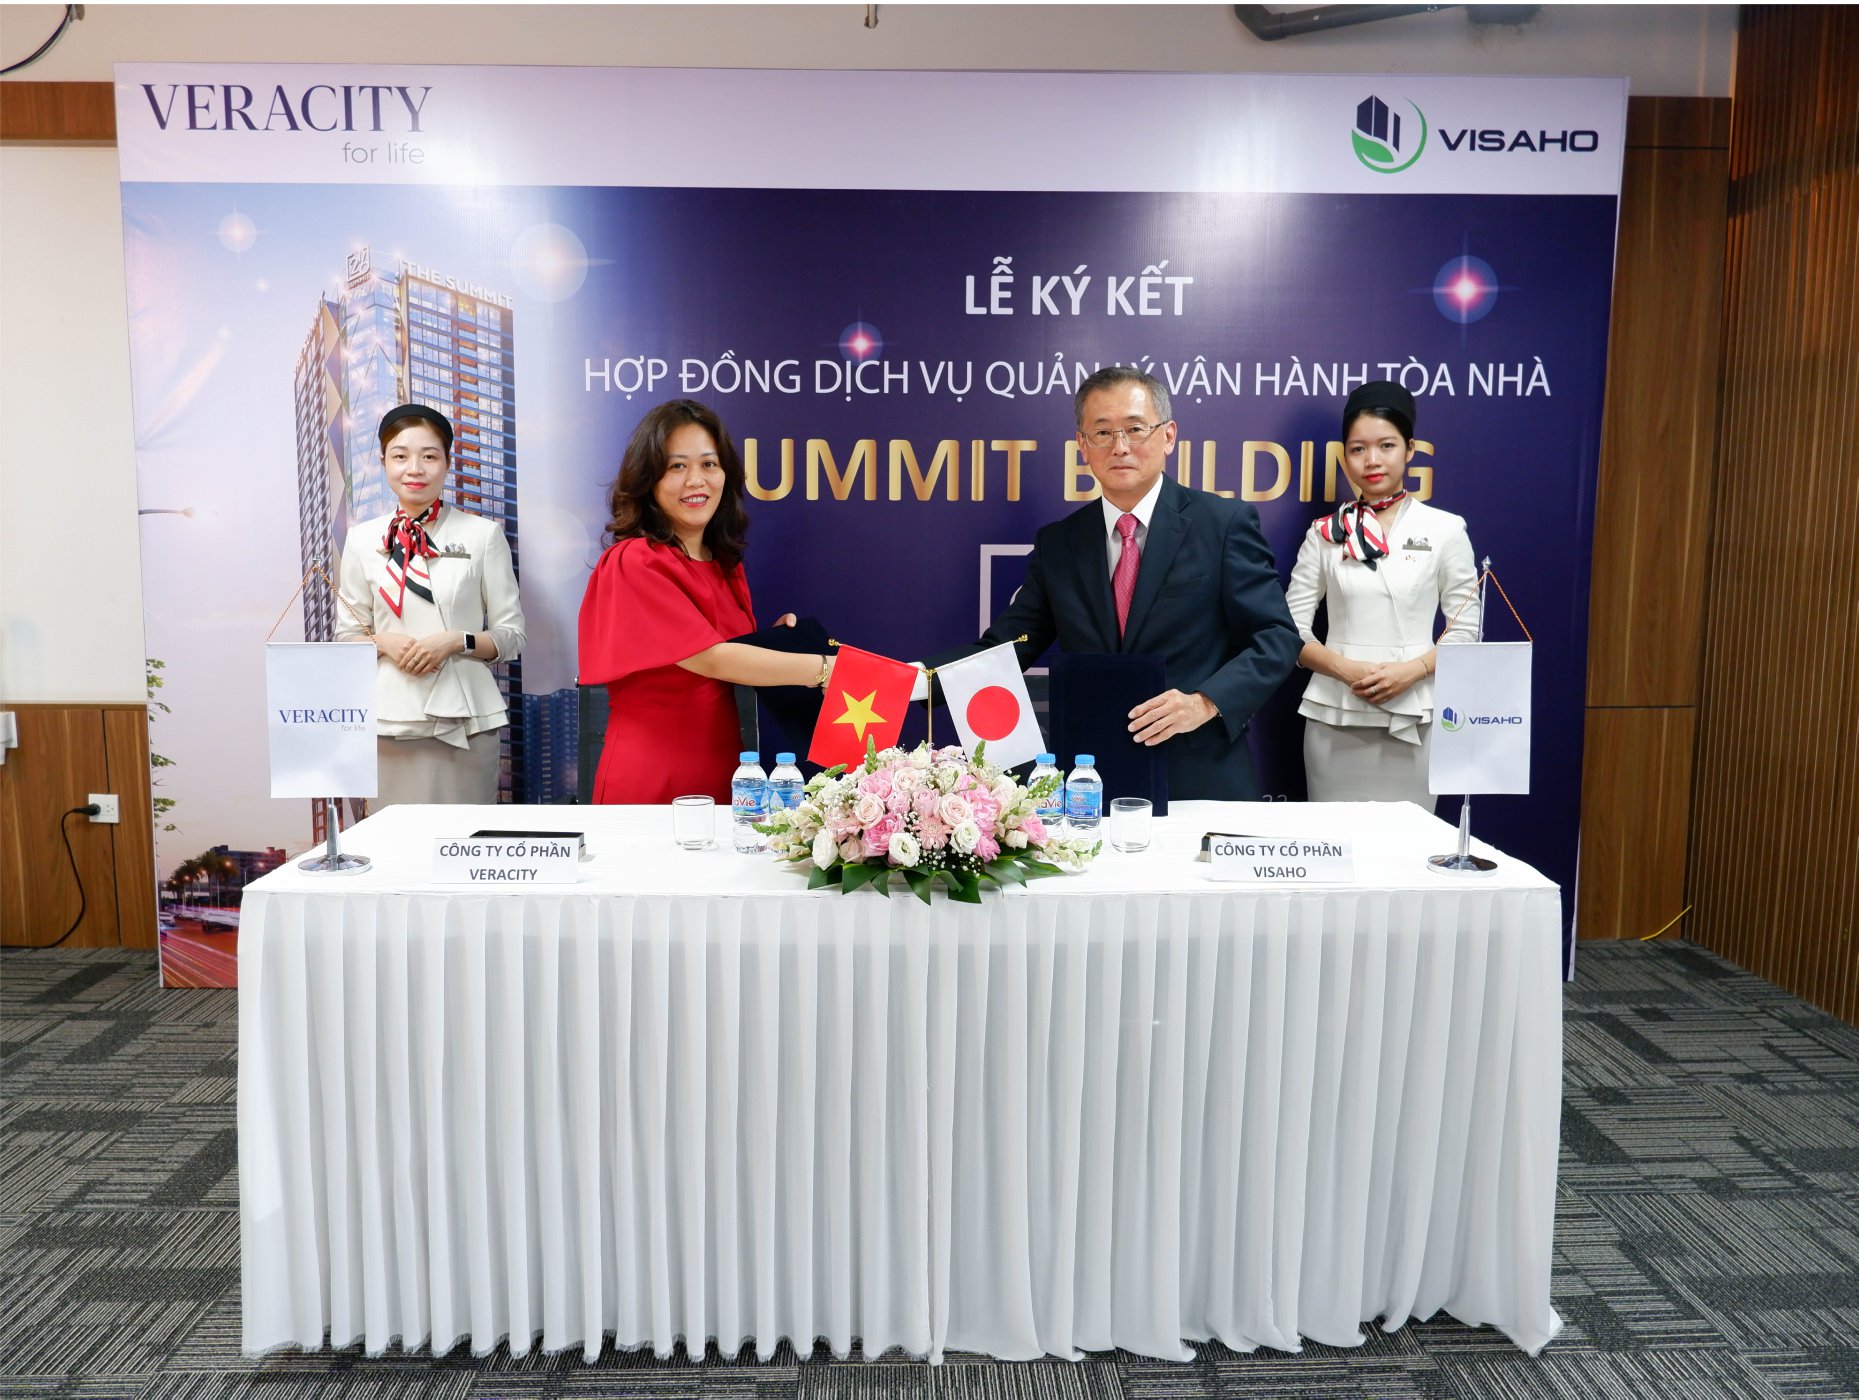 VISAHO officially manages Summit Building high-end apartment building